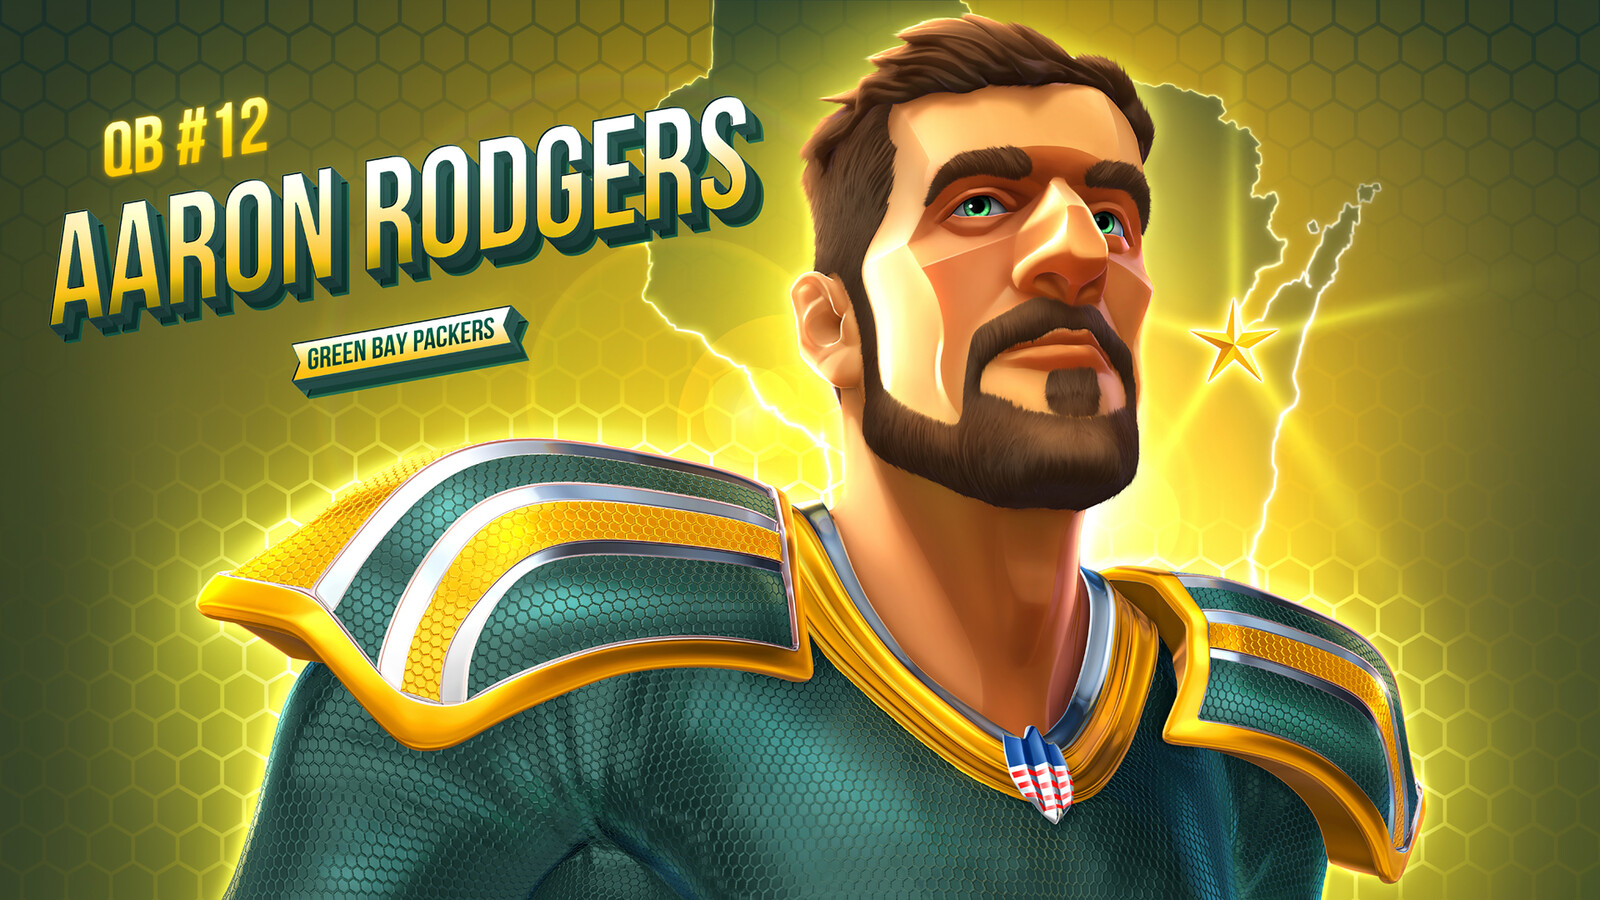 Aaron Rodgers: Stylized test